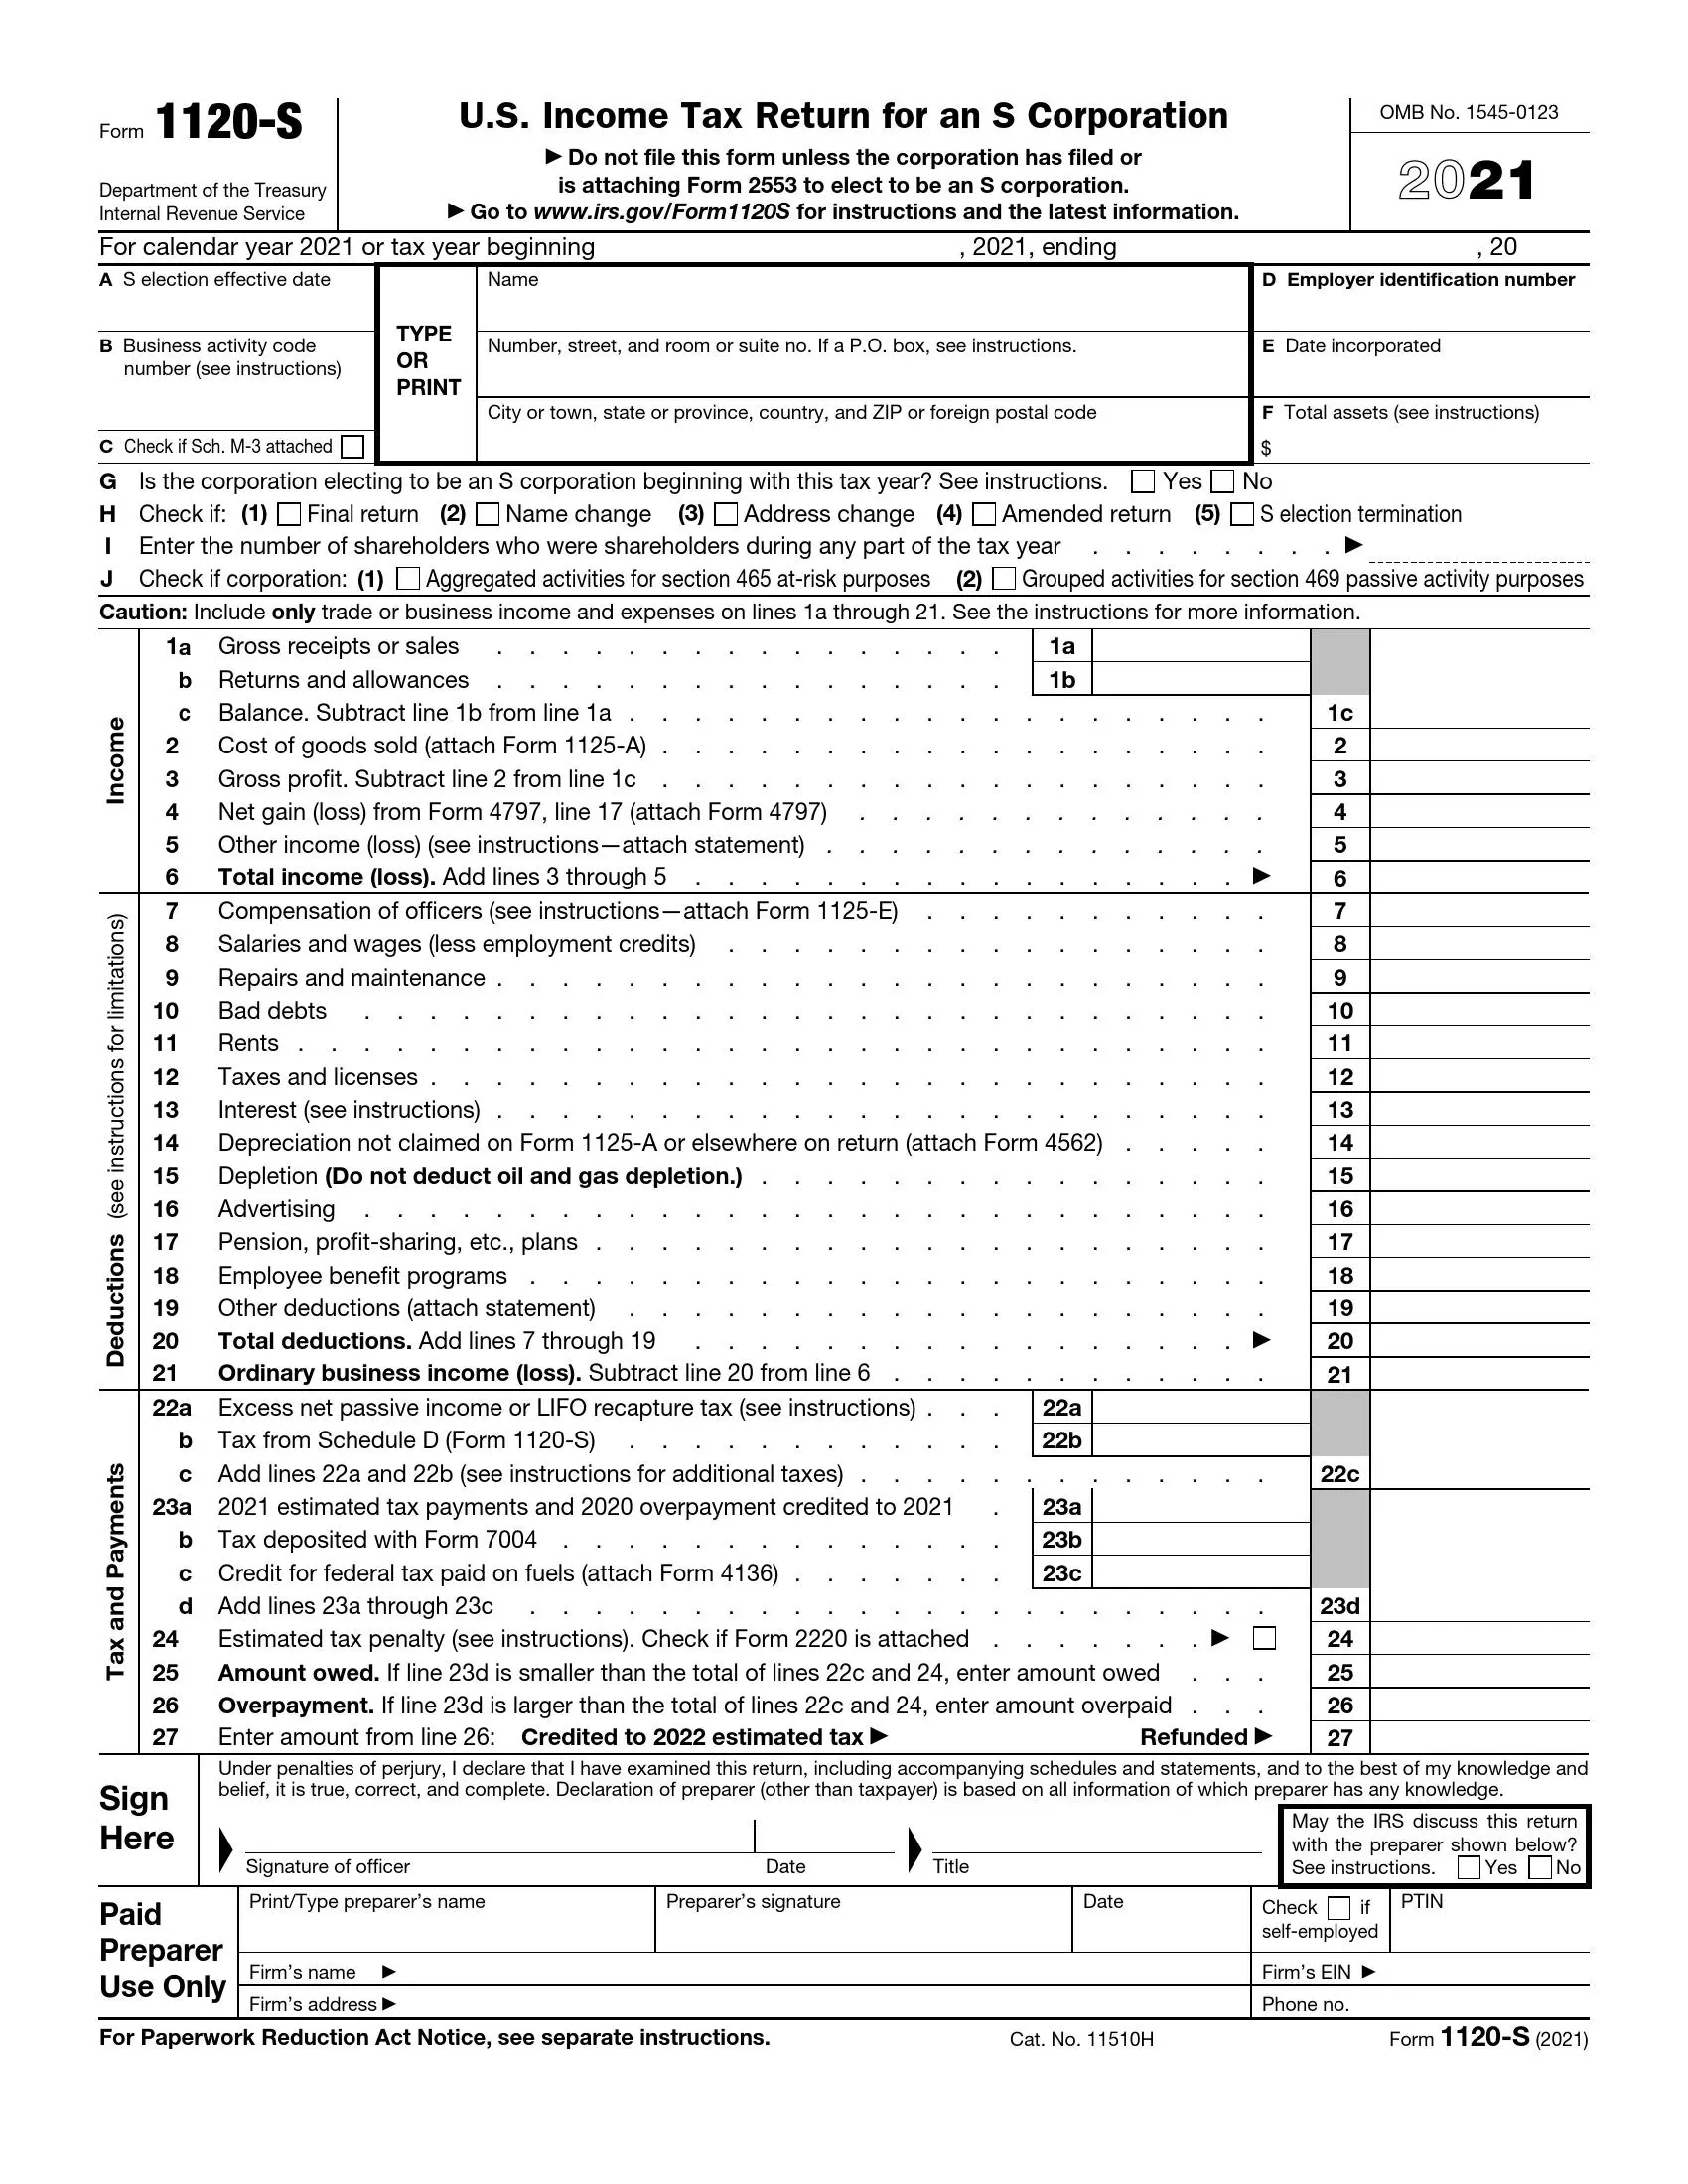 irs form 1120 s 2021 preview